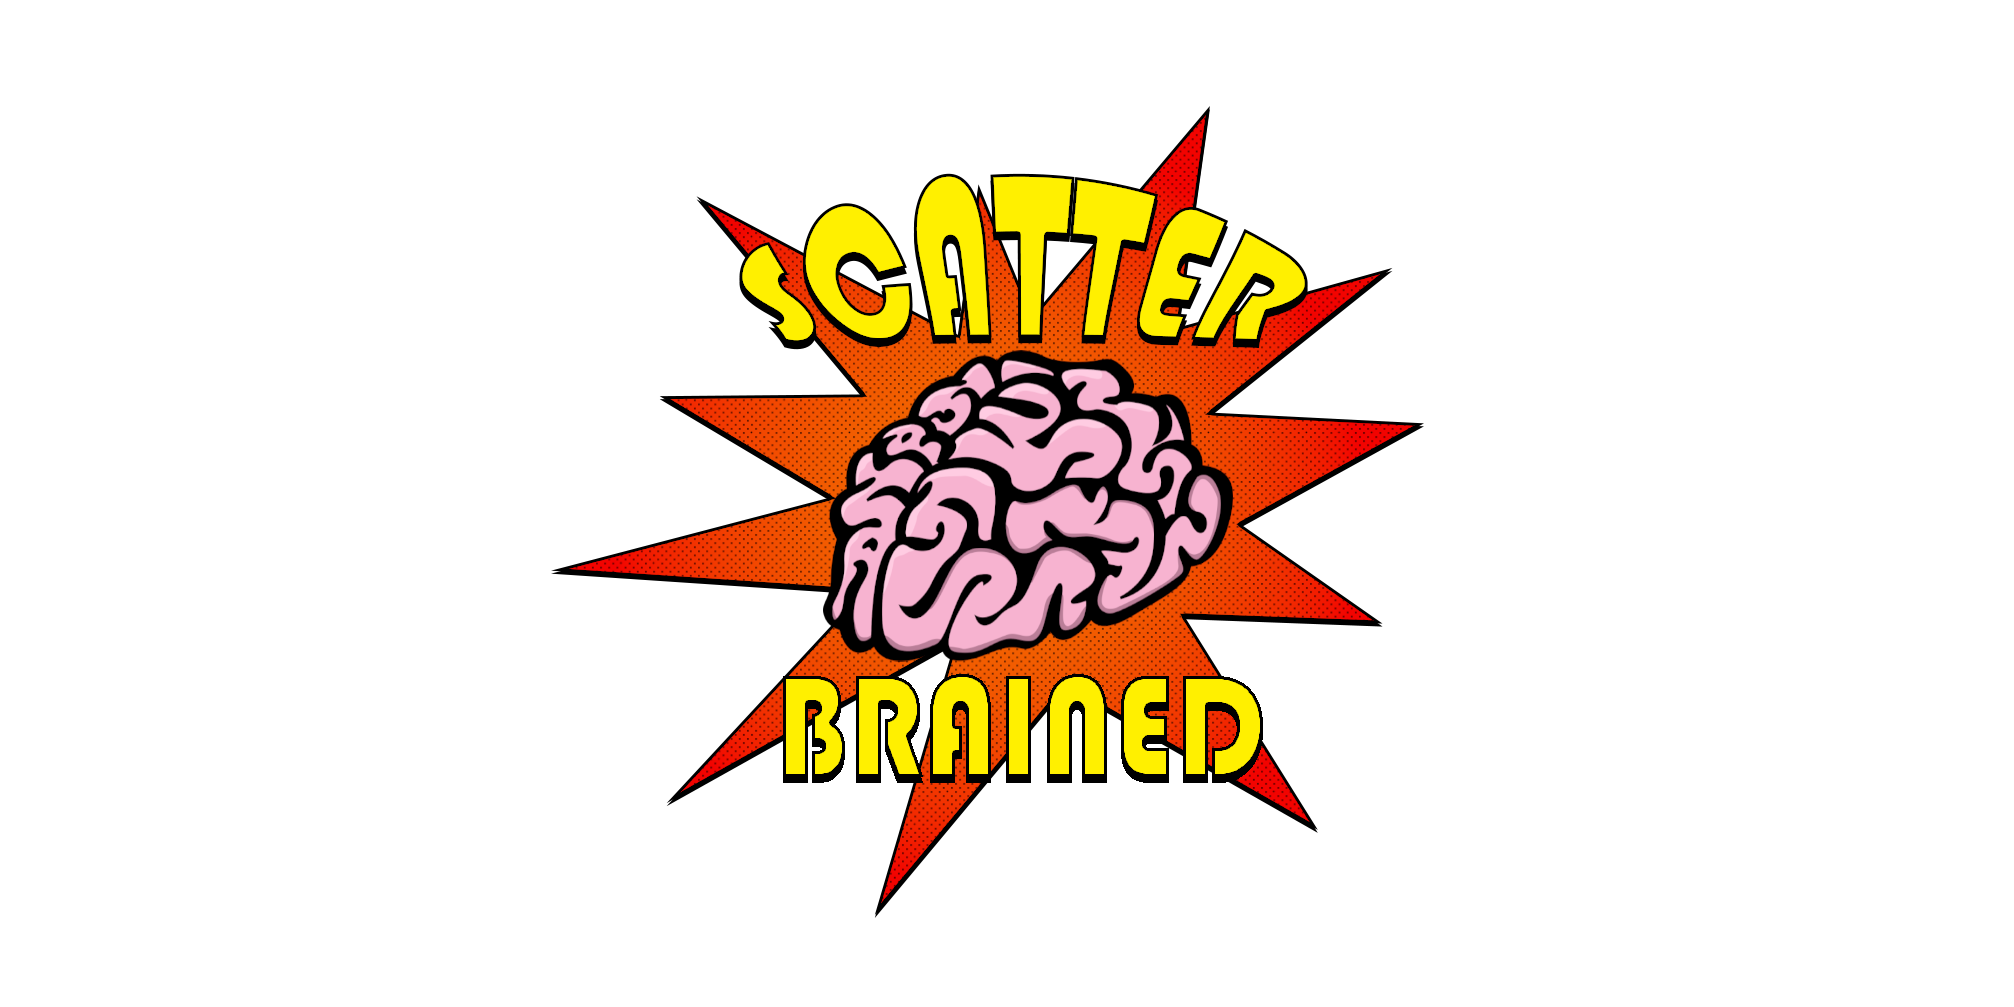 Scatterbrained – Episode 2 – The E3 Spectacular